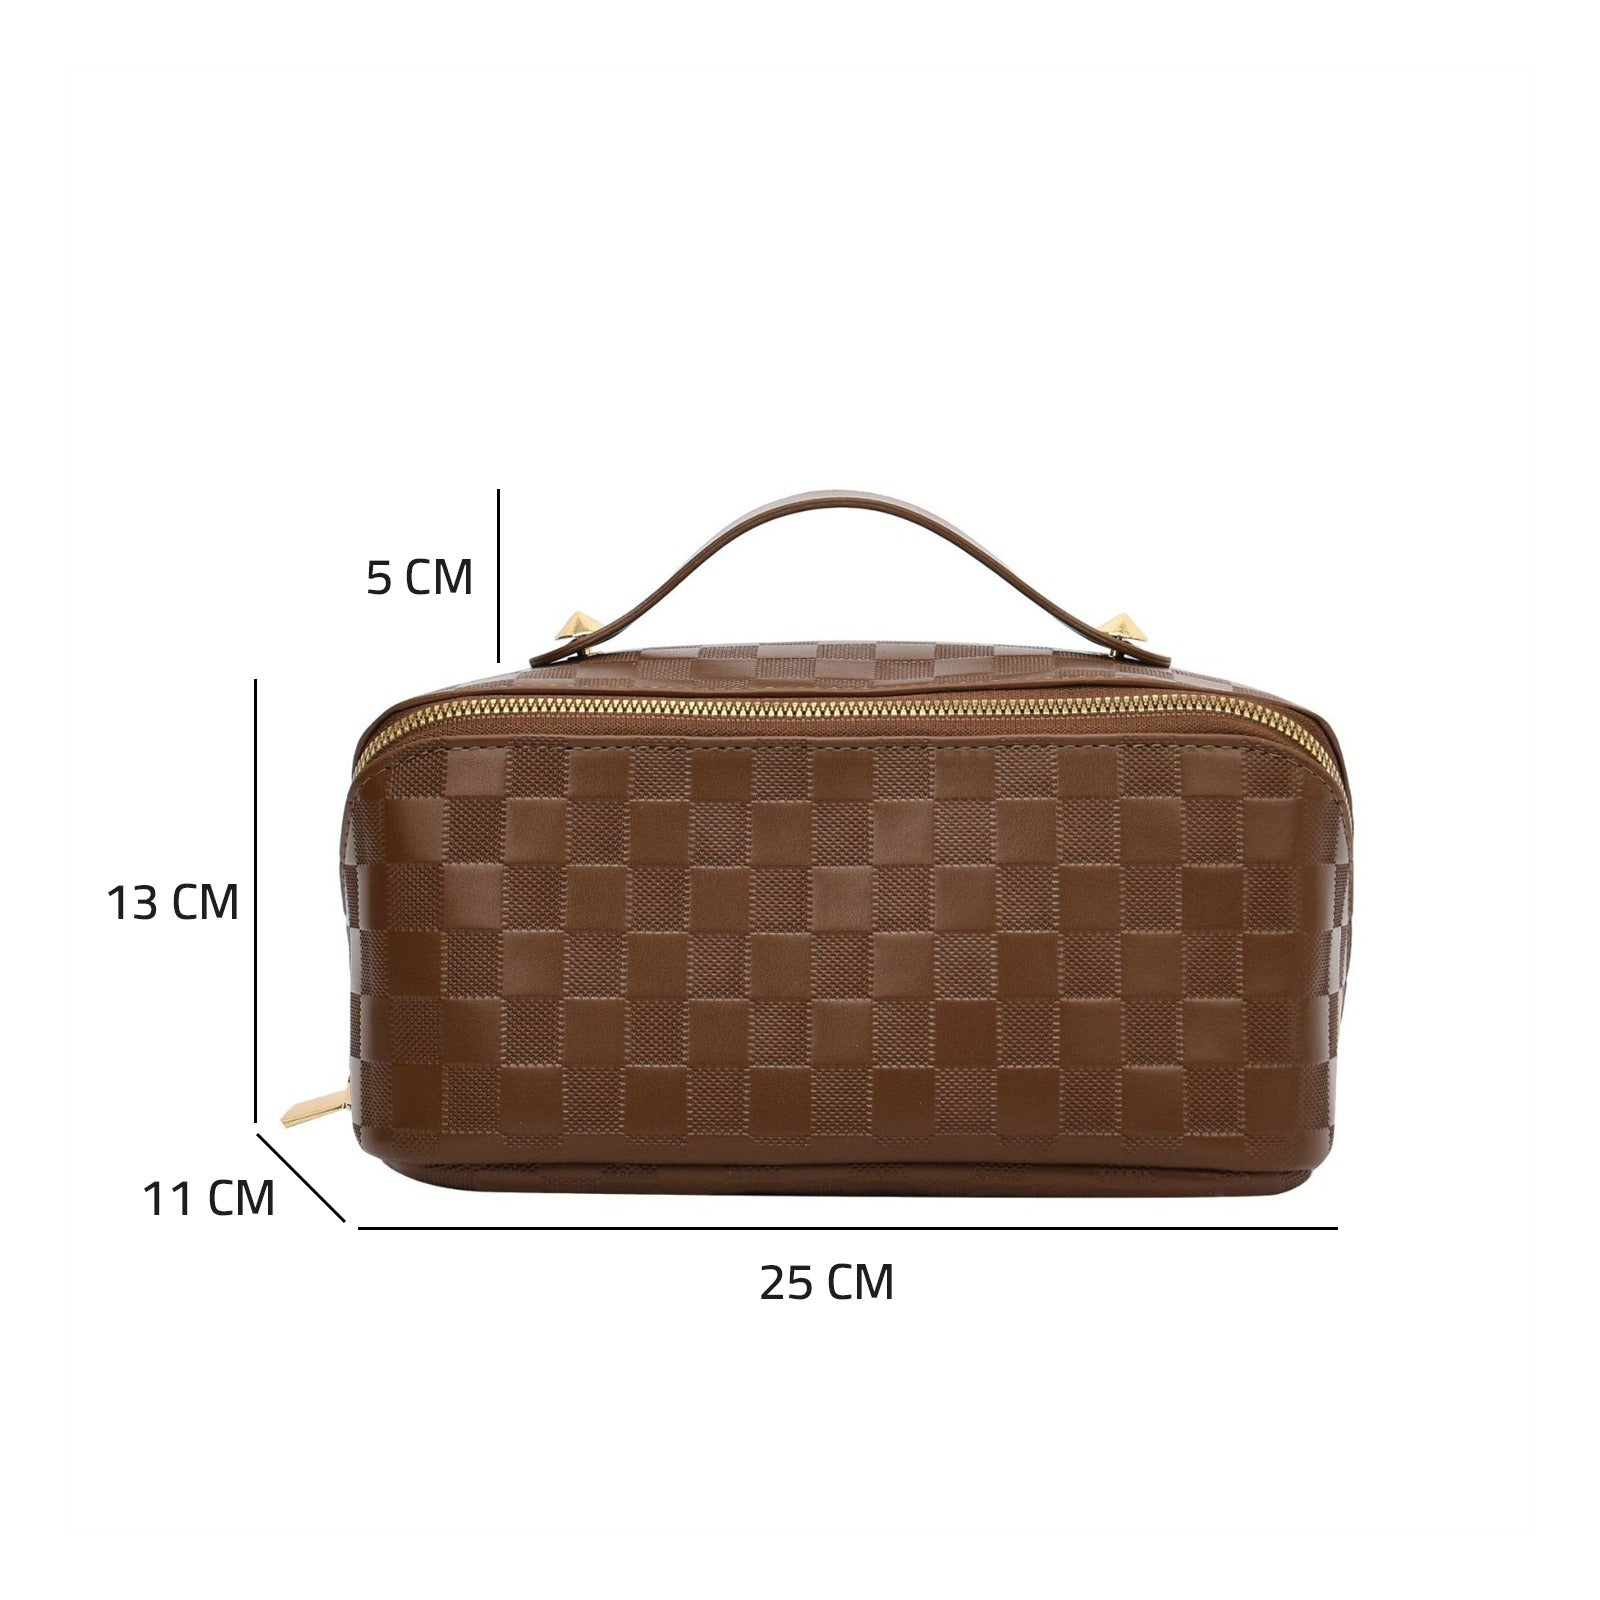 Showcasing Brown color Cosmetic Bag by mentioning it's size 